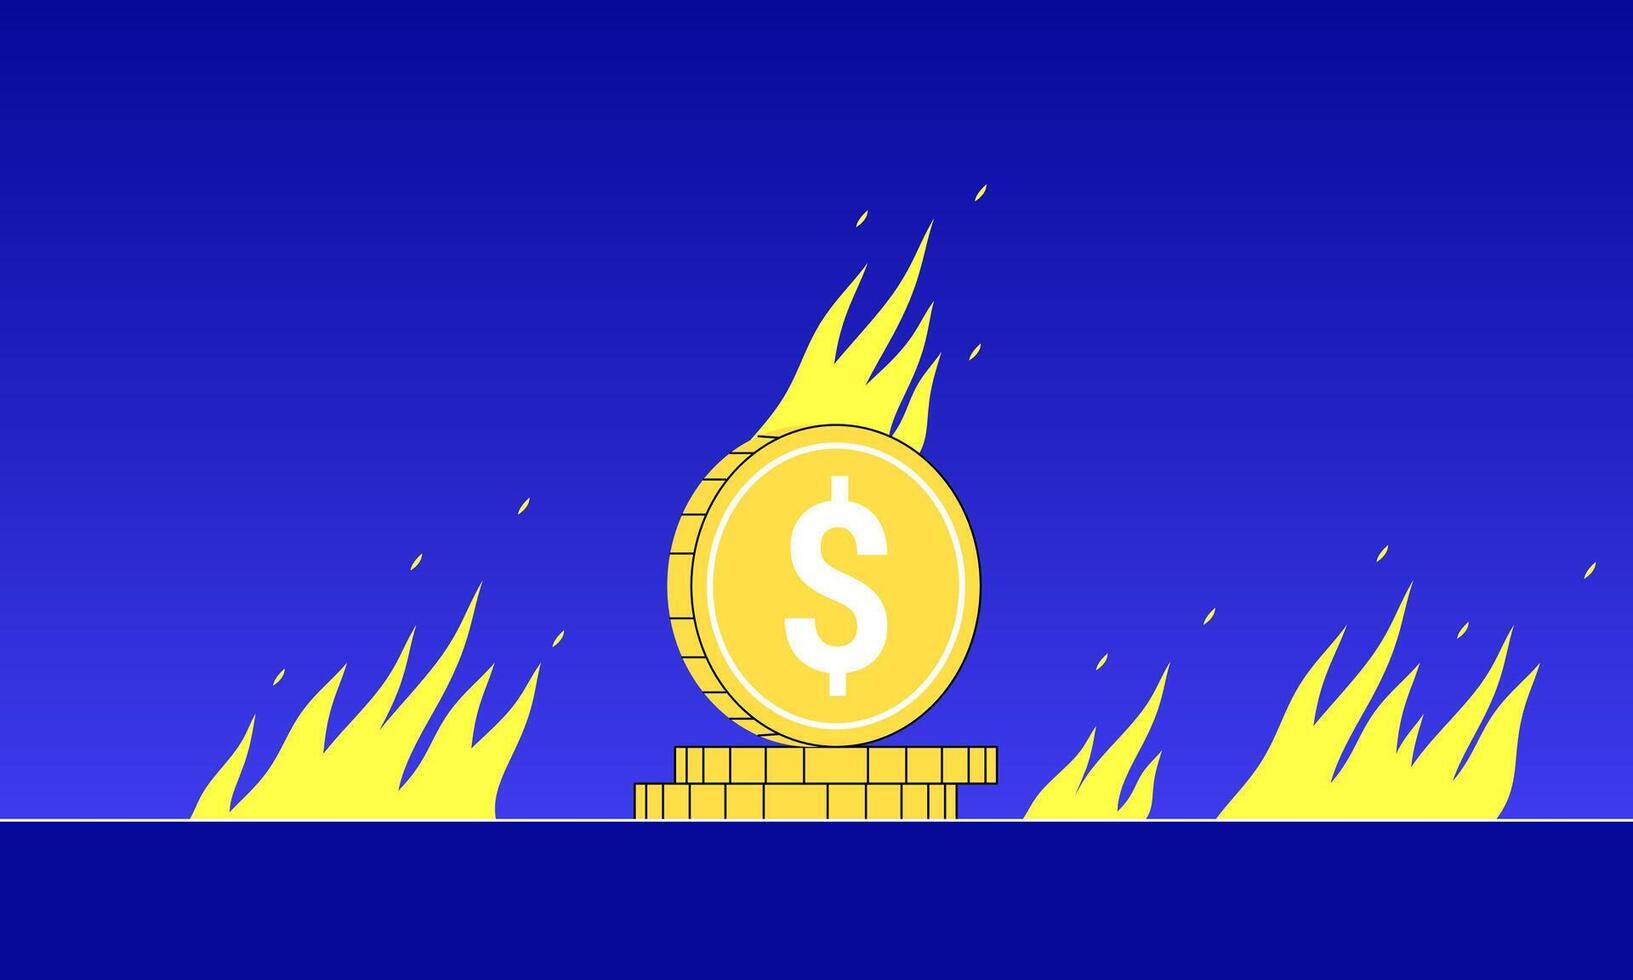 Illustration of burning coins symbolizing financial loss, inflation, and financial crisis vector